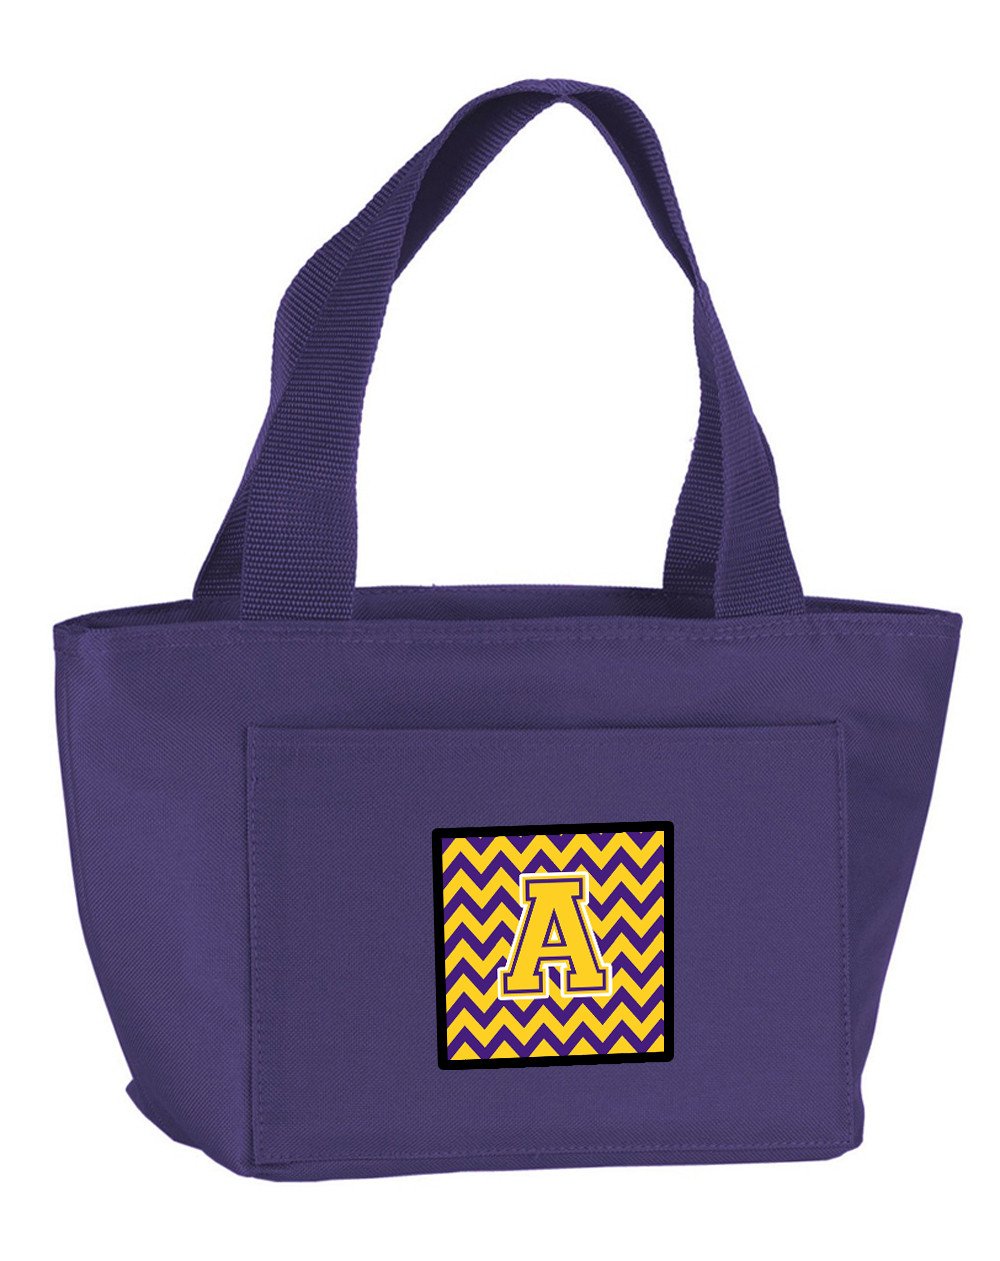 Letter A Chevron Purple and Gold Lunch Bag CJ1041-APR-8808 by Caroline's Treasures